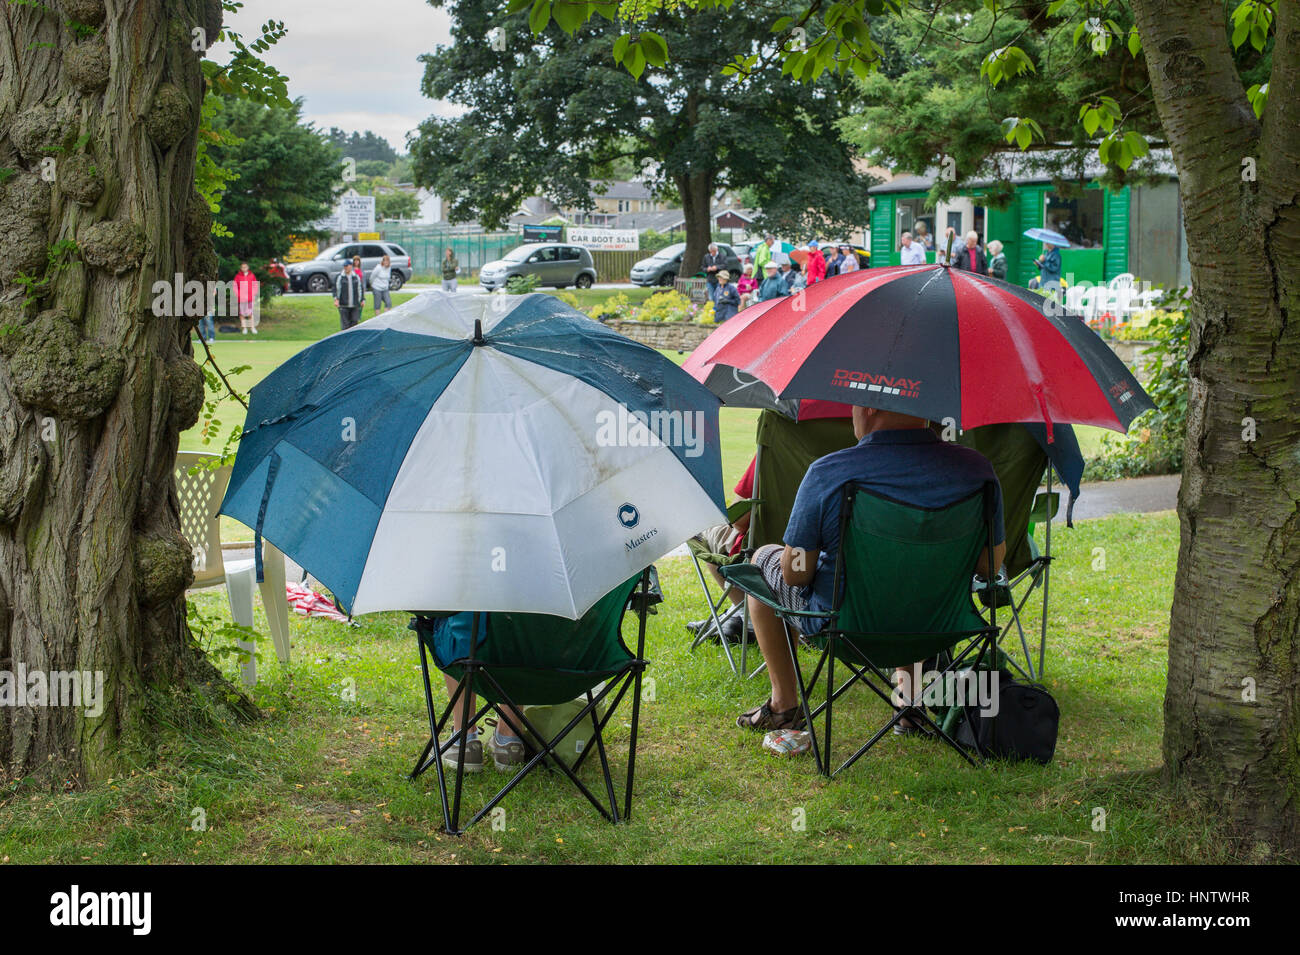 Competitors and spectators (in the rain) at a crown green bowling match on the village bowling green - Burley In Wharfedale, West Yorkshire, England. Stock Photo